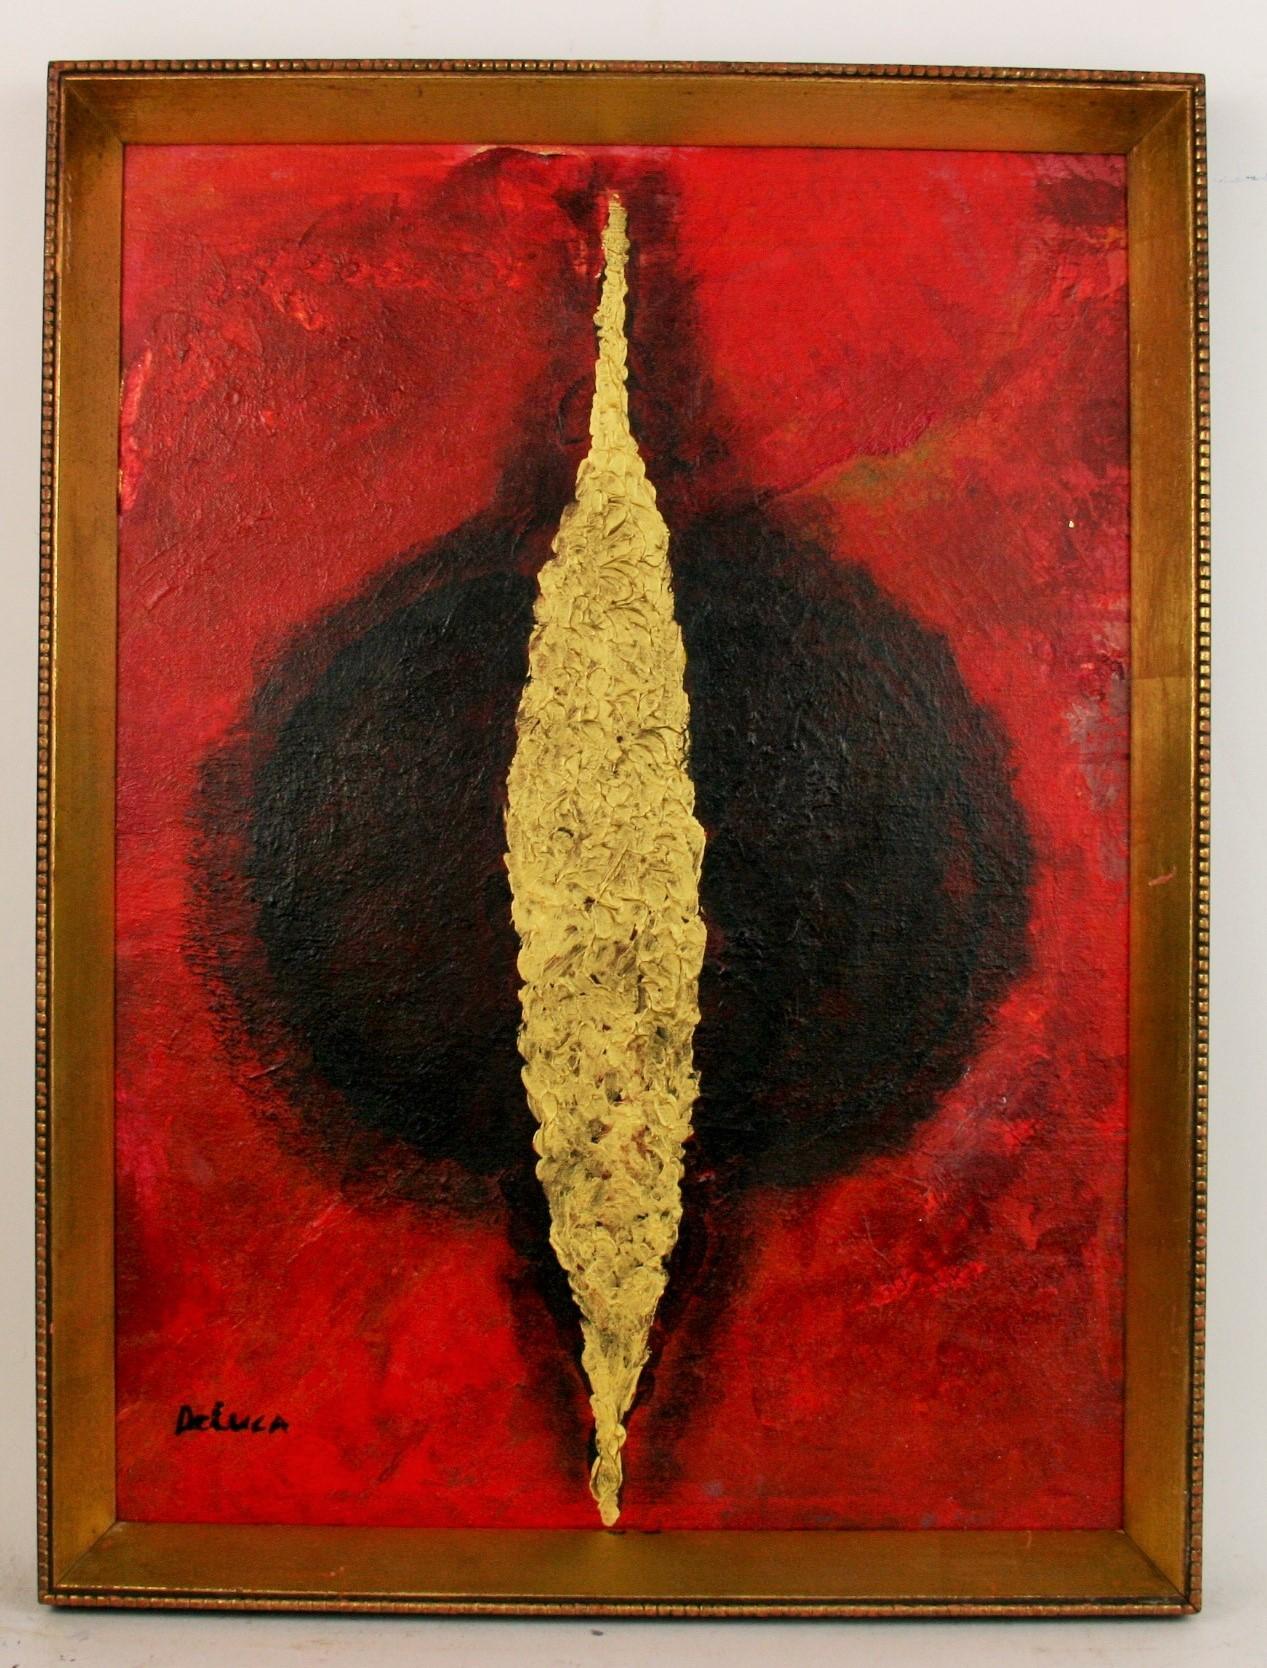 5-3261a  Red and Gold abstract vintage  painting,acrylic on board set in a gilt/black wood frame,signed by De Luca. Image size 18.5 H x 13.5 W